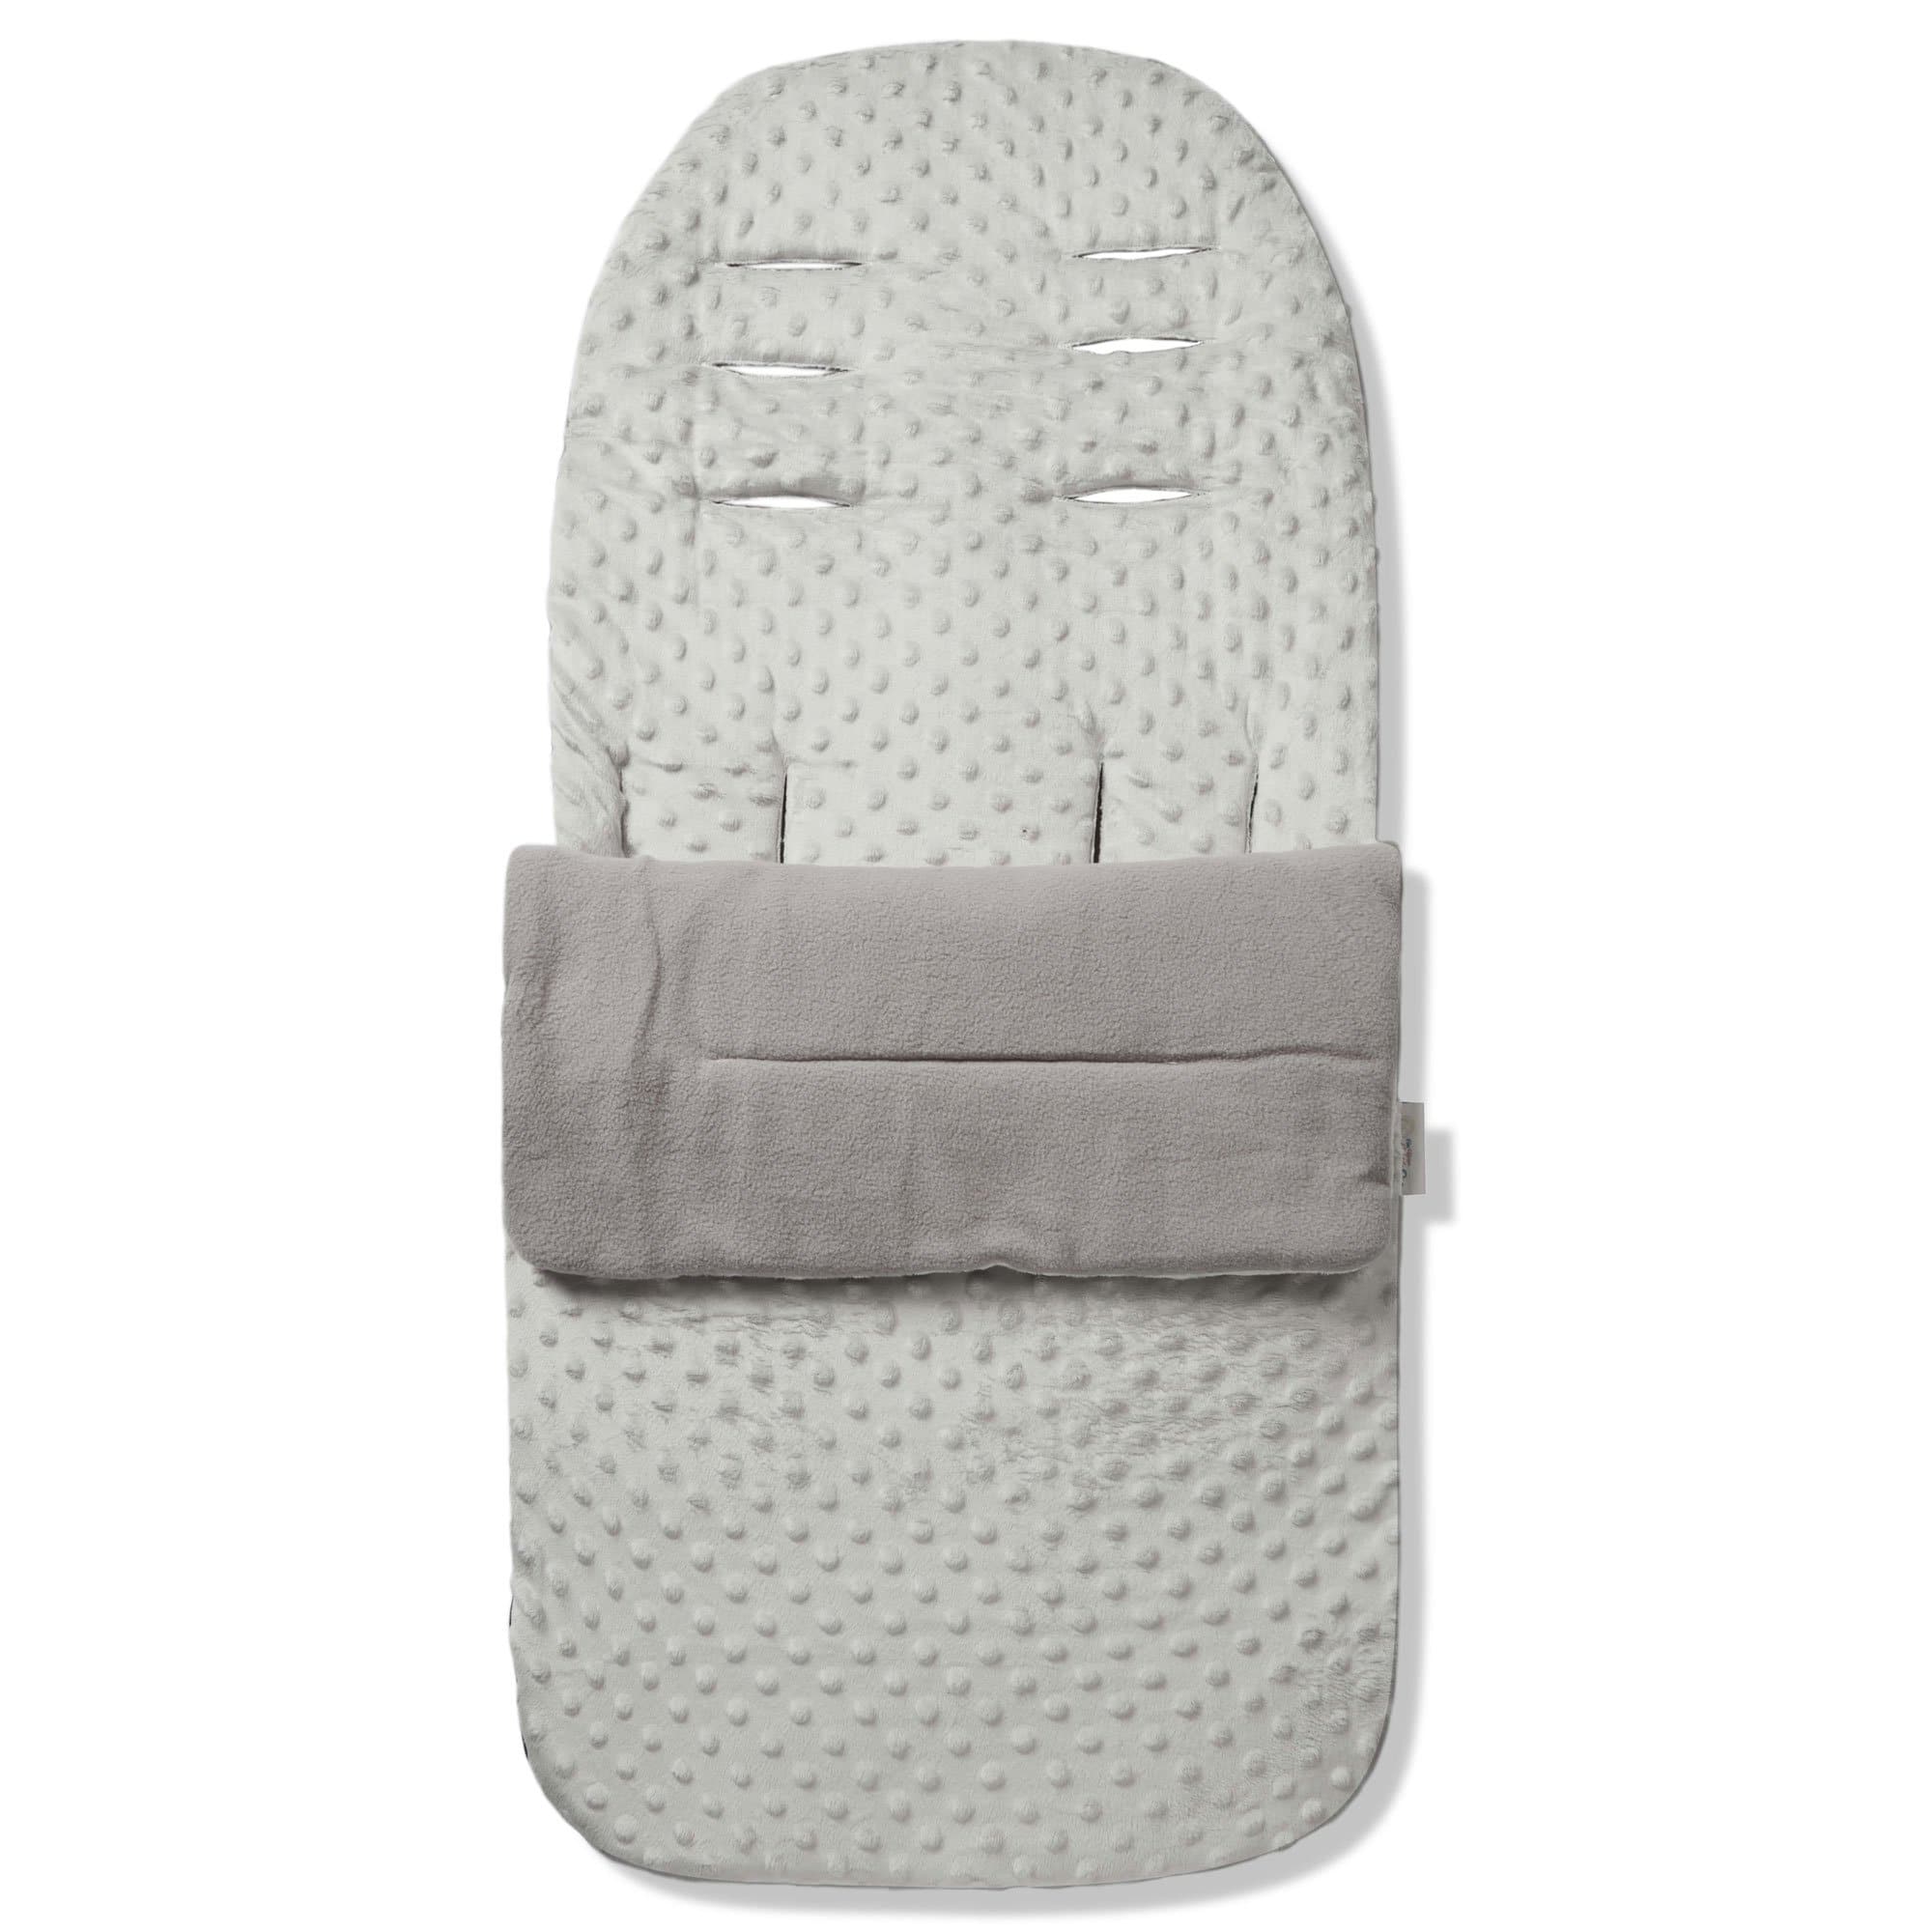 Dimple Footmuff / Cosy Toes Compatible with Bugaboo - Grey / Fits All Models | For Your Little One